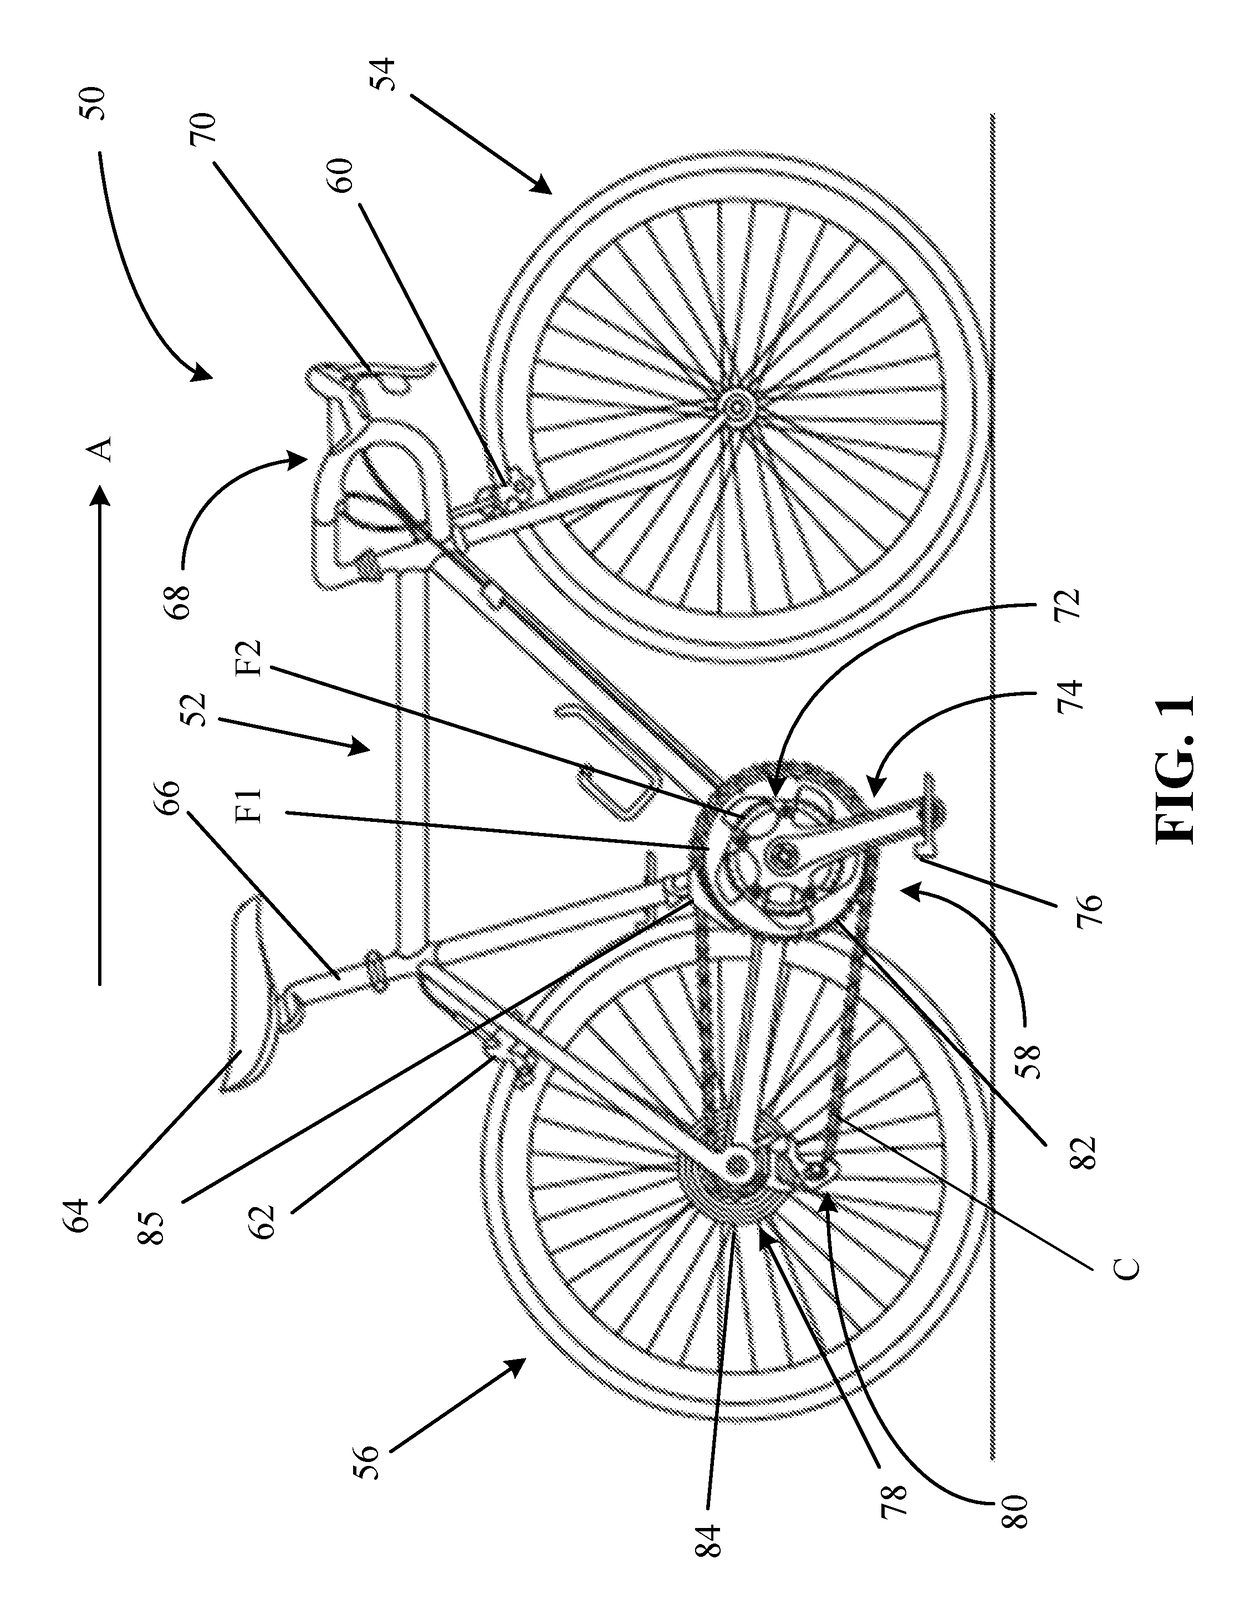 Damper for a bicycle component